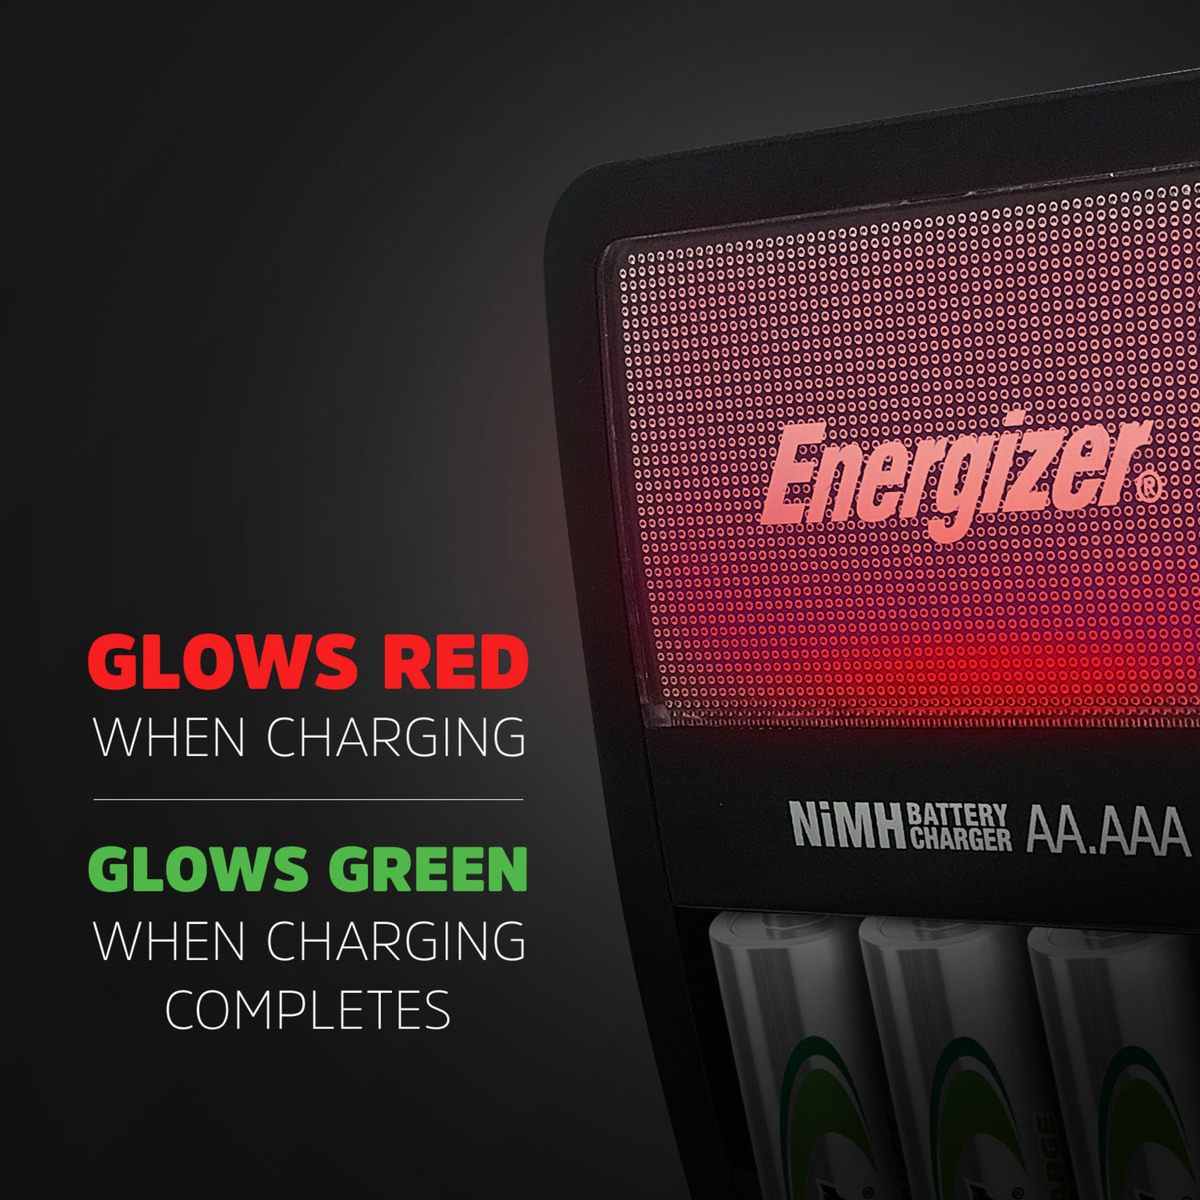 Energizer Recharge Maxi Charger UK & 2 AA Batteries, Combo Pack